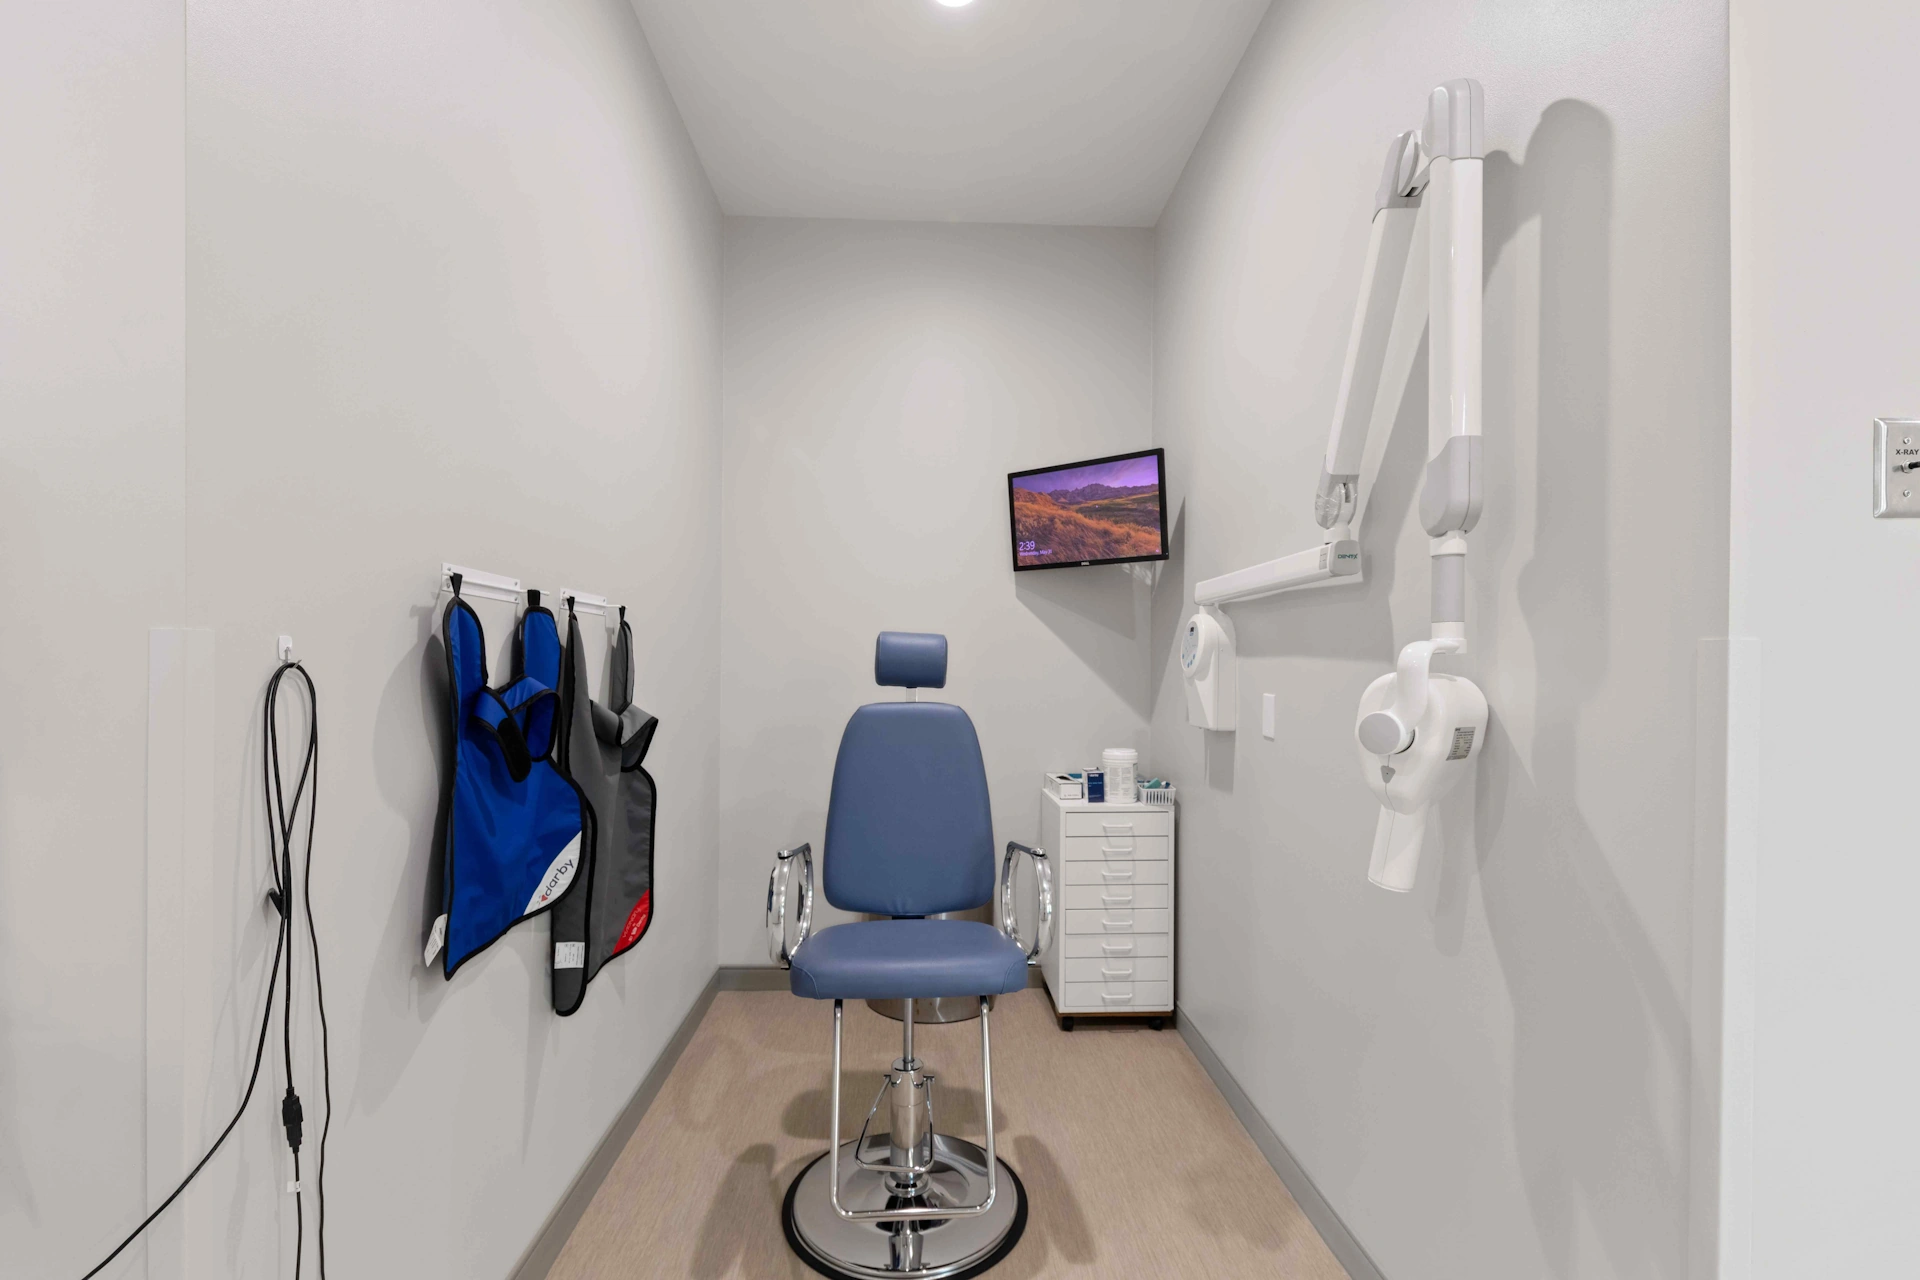 A treatment room at the Lafayette Pediatric Dentistry office